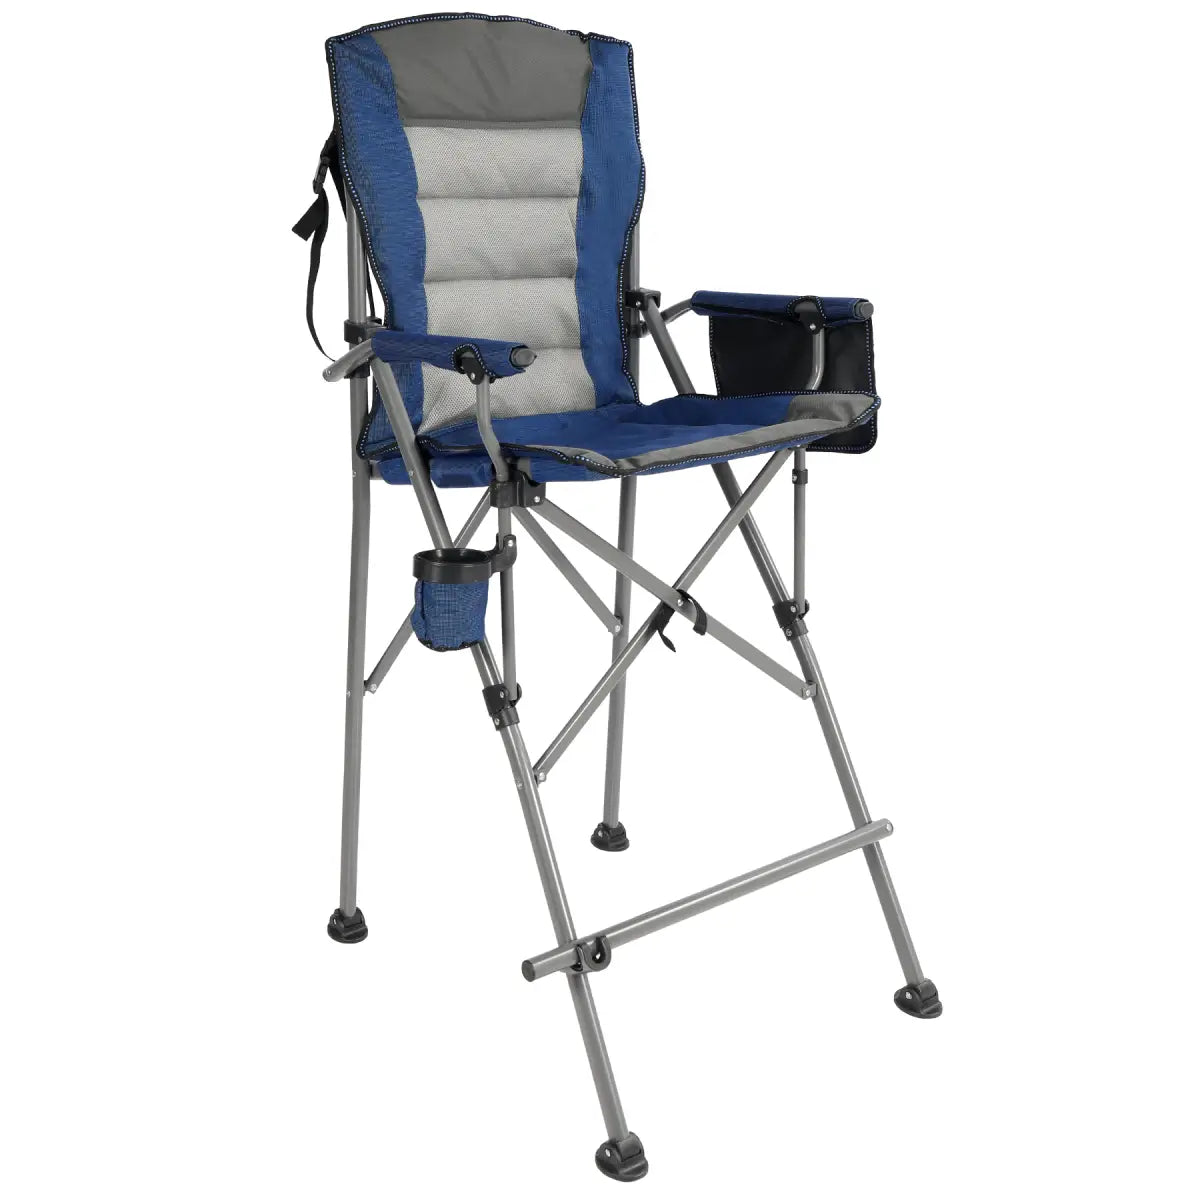 Extra Tall Bar Height Foldable Director Chairs for Adults with High Back and Hard Arms, Support 330lbs